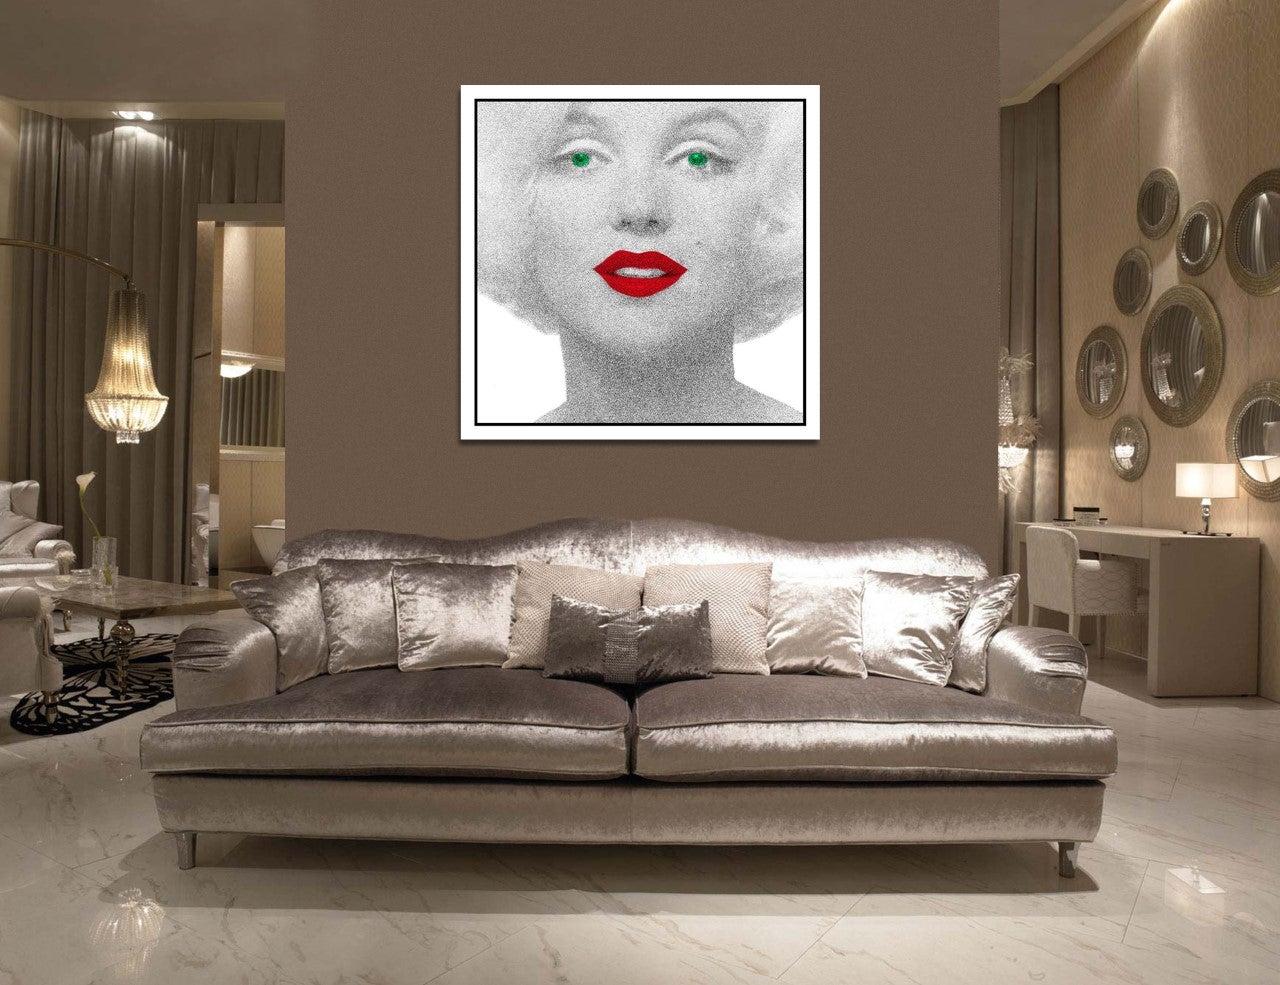 **FINAL MONTH OF THE ANNUAL 90 DAYS SALE FOR INVENTORY RENEWAL**
**PRICED EXTRA LOW TO BE SOLD BY MARCH 31ST ONLY - TAKE ADVANTAGE OF IT**

Celebrating the one and only Marilyn Monroe in this unique series by Mauro Oliveira. 

Limited edition of 30